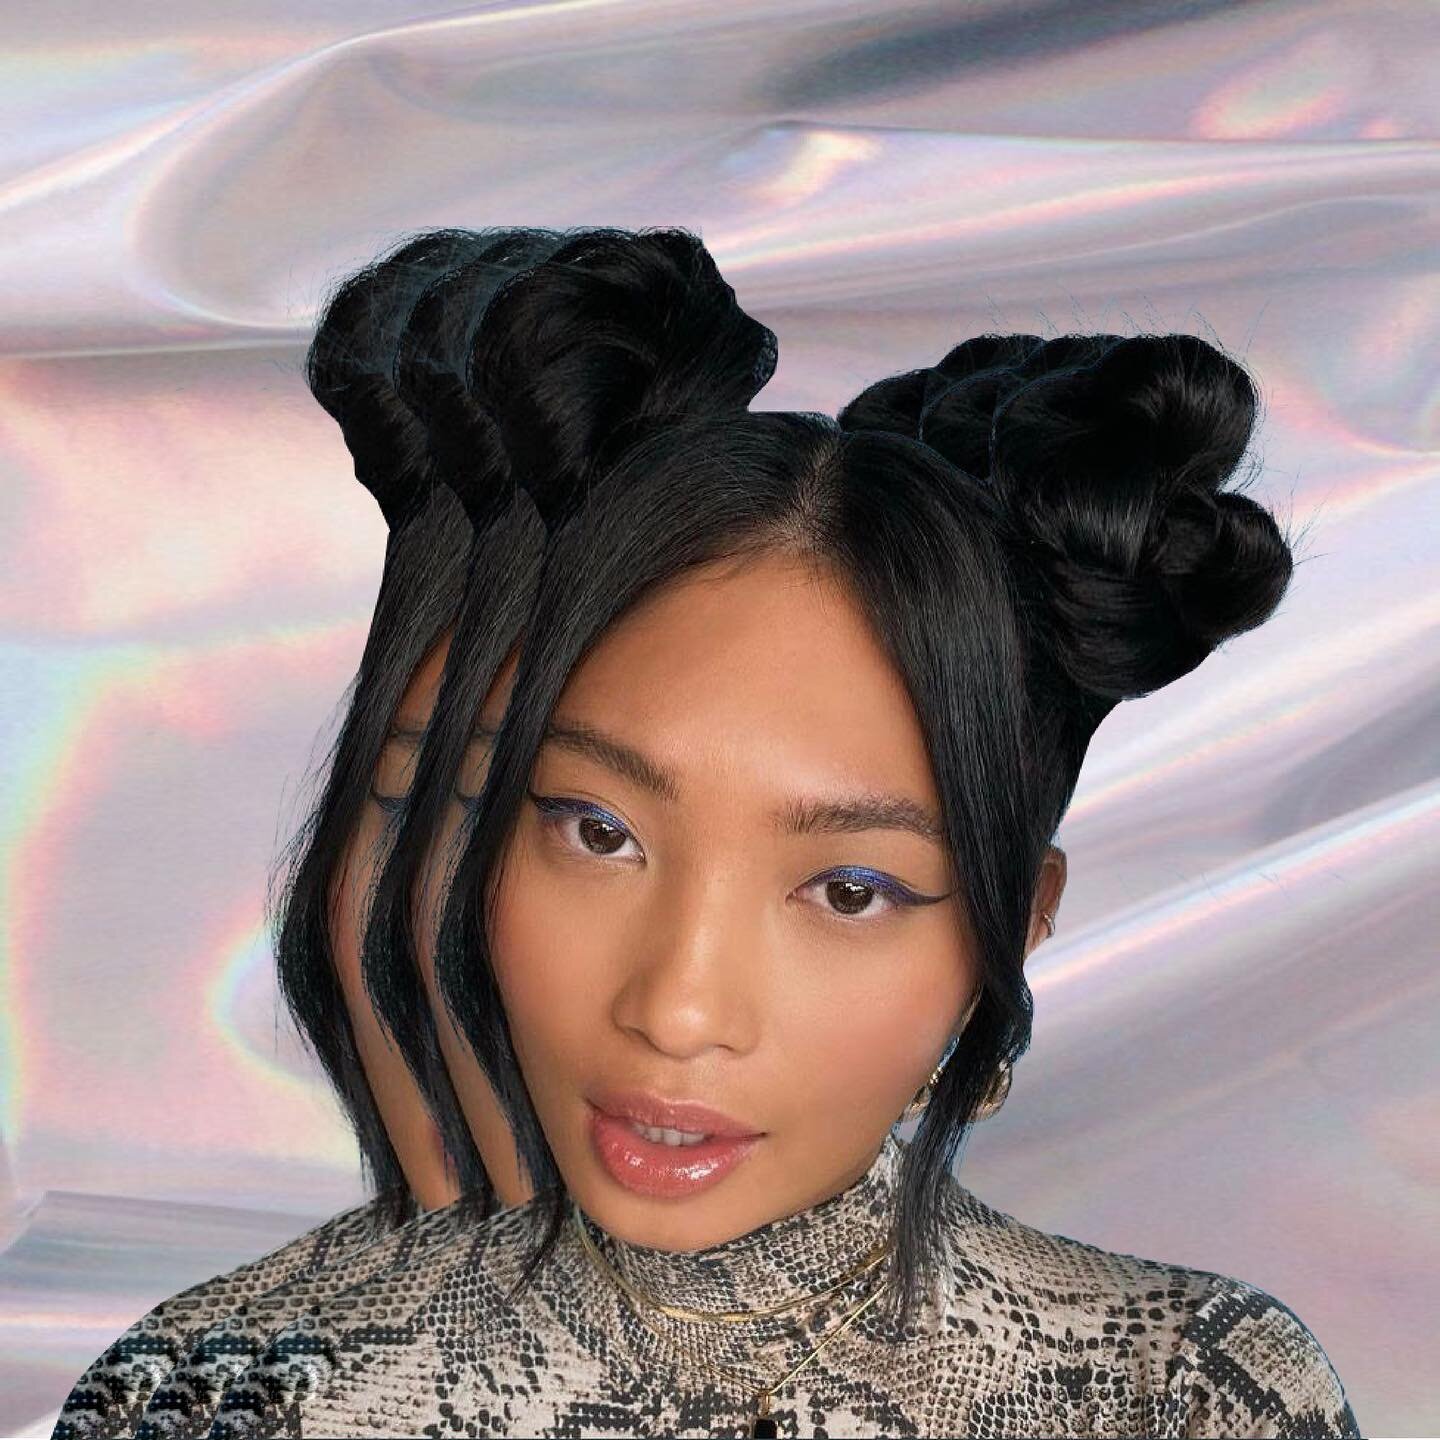 we think it is time to bring back the space buns, because they're so fun! &amp; what is life without a lil' fun in it?! 🛸🛸🛸

#amika #yychair #hairstyles #space #bun #art #aesthetic